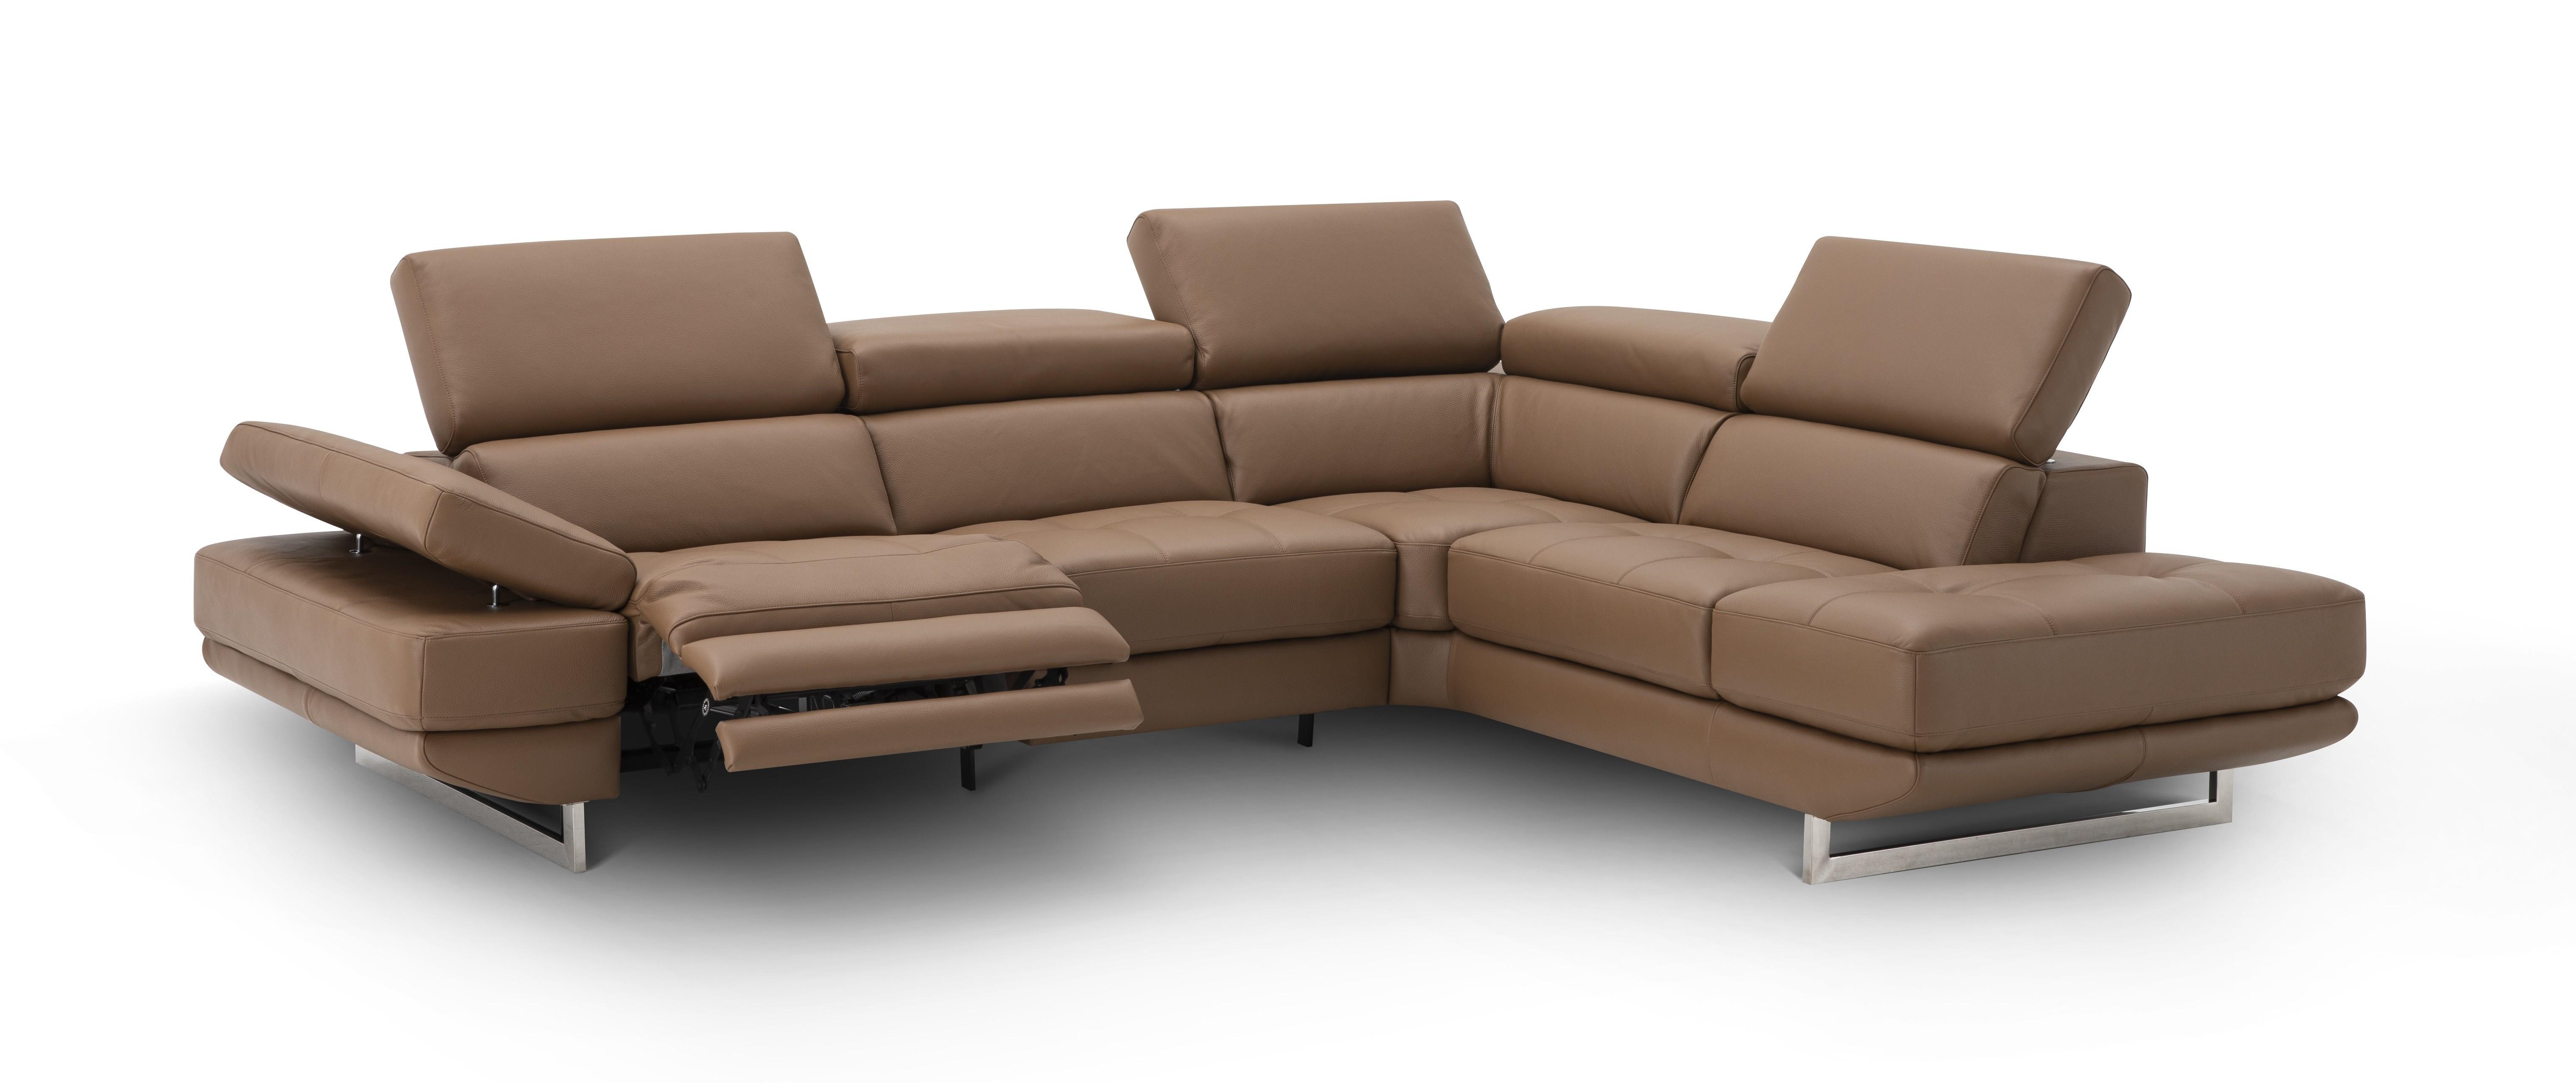 Modern Reclining Sectional The Annalaise 19944 in Caramel Leather